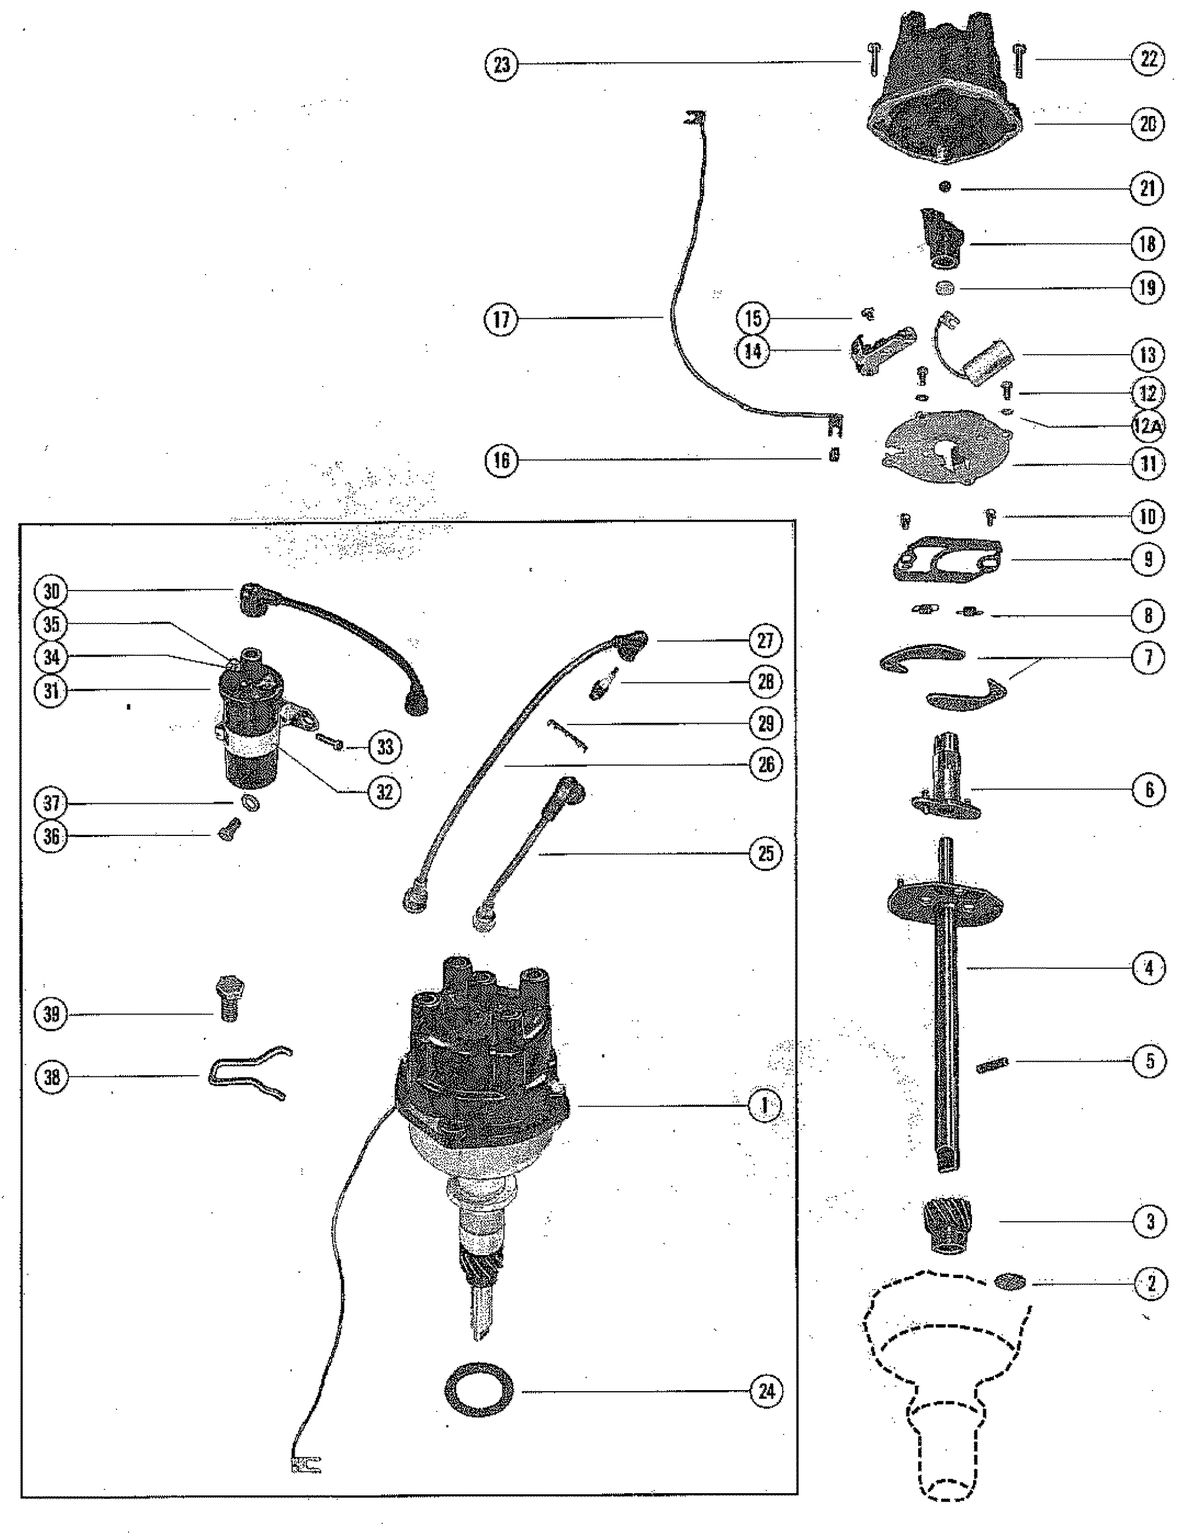 MERCRUISER 140 ENGINE DISTRIBUTOR ASSEMBLY AND COIL